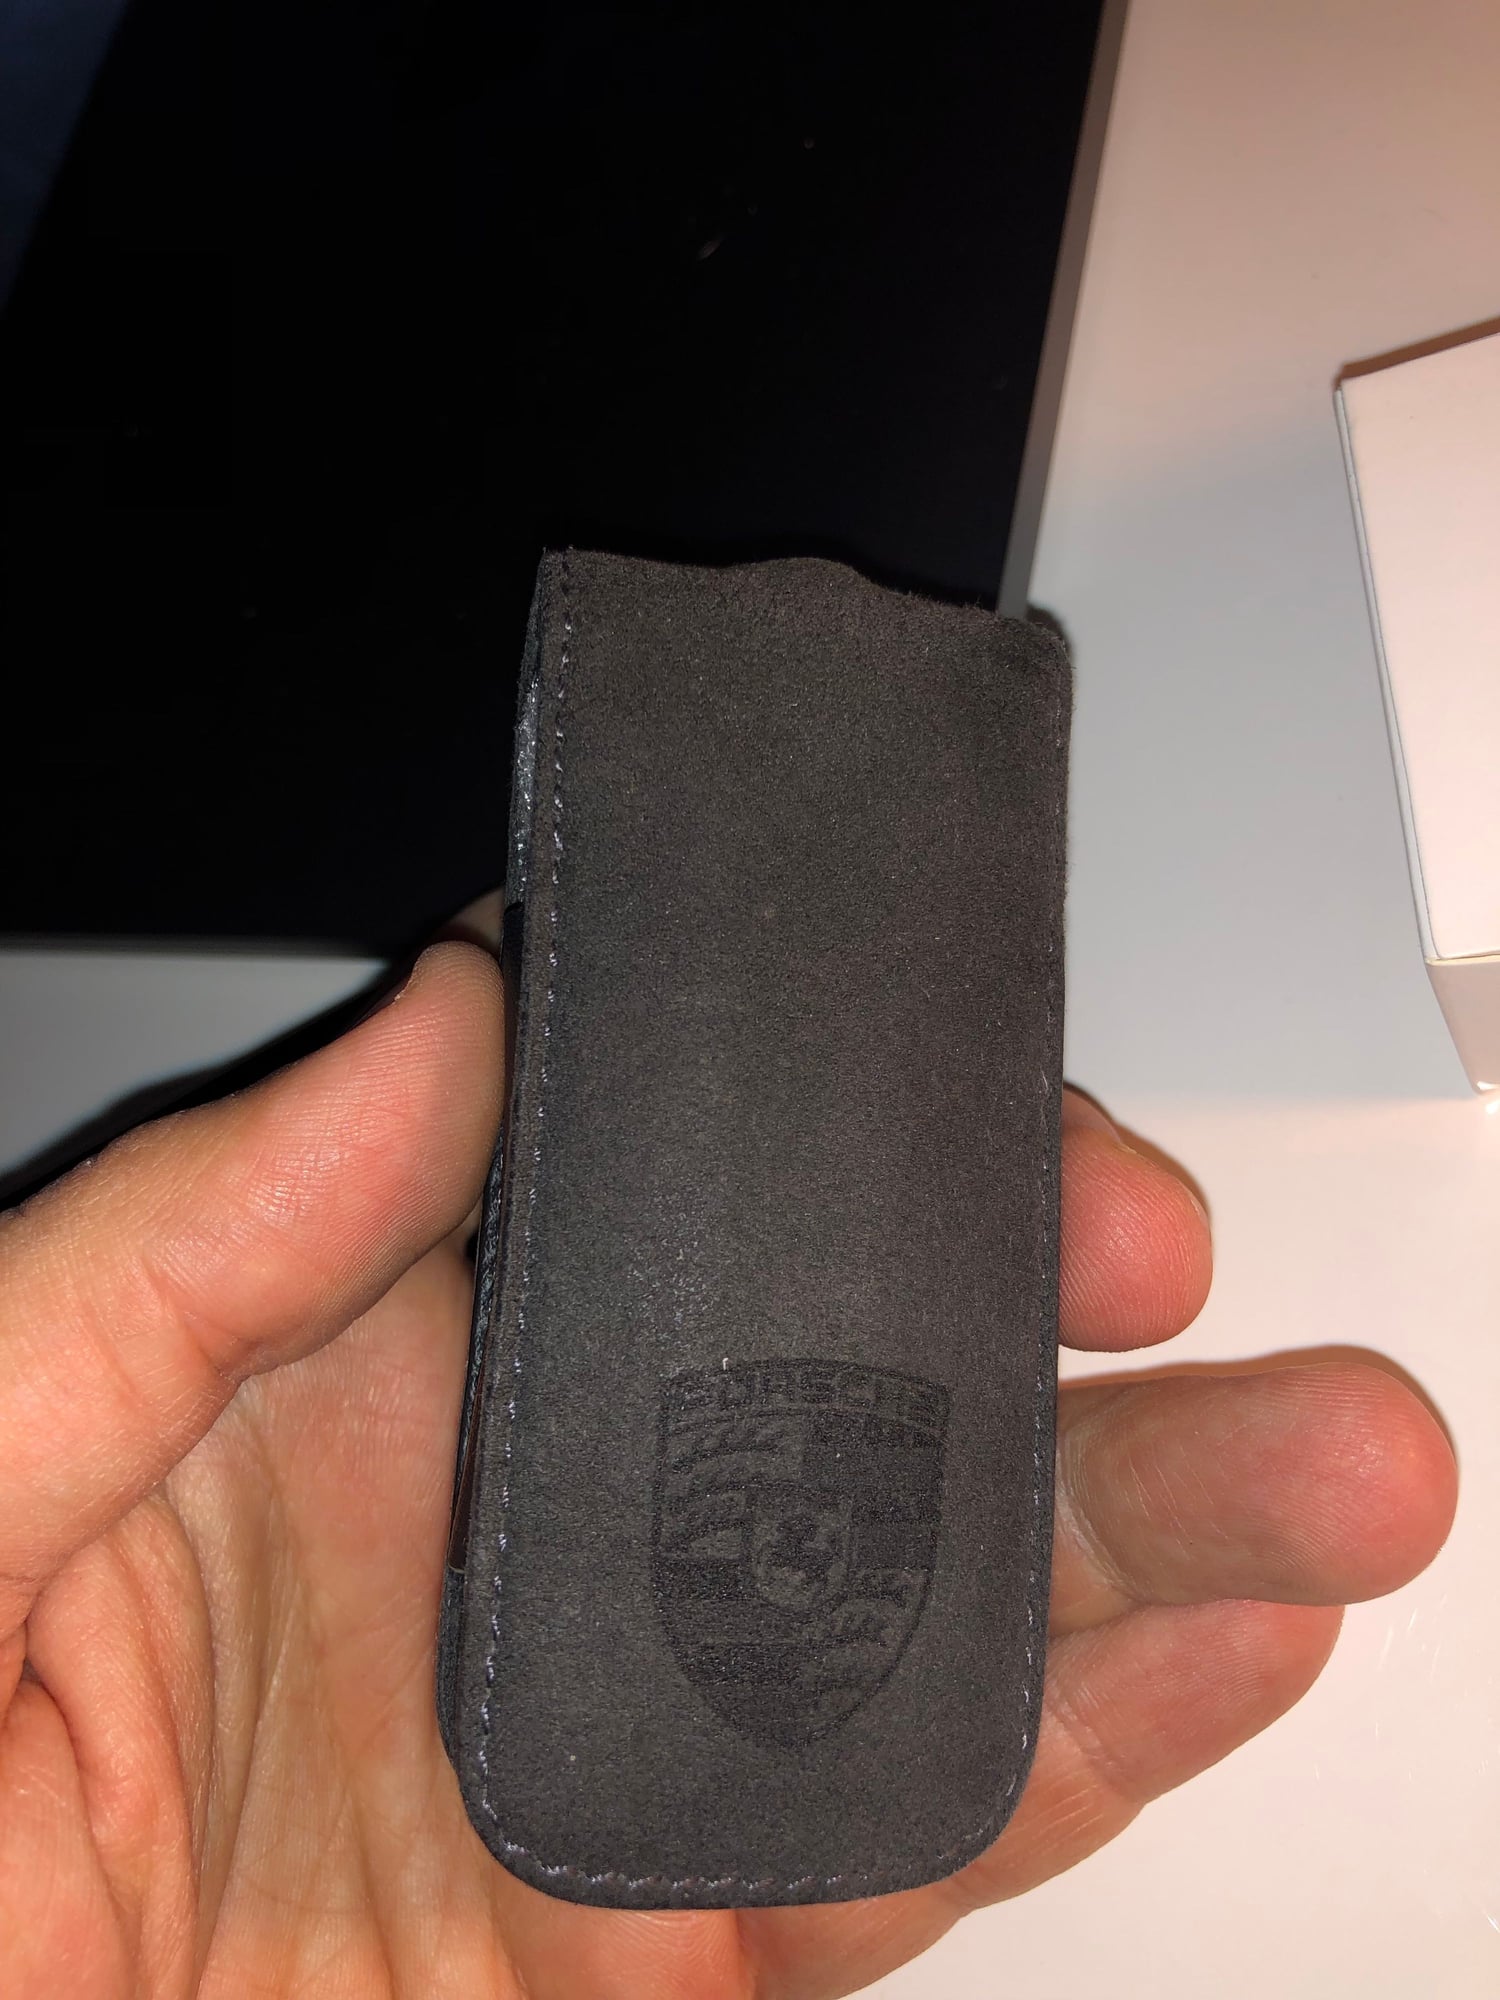 Accessories - Alcantara Key case/pouch - Used - Fort Lauderdale, FL 33312, United States